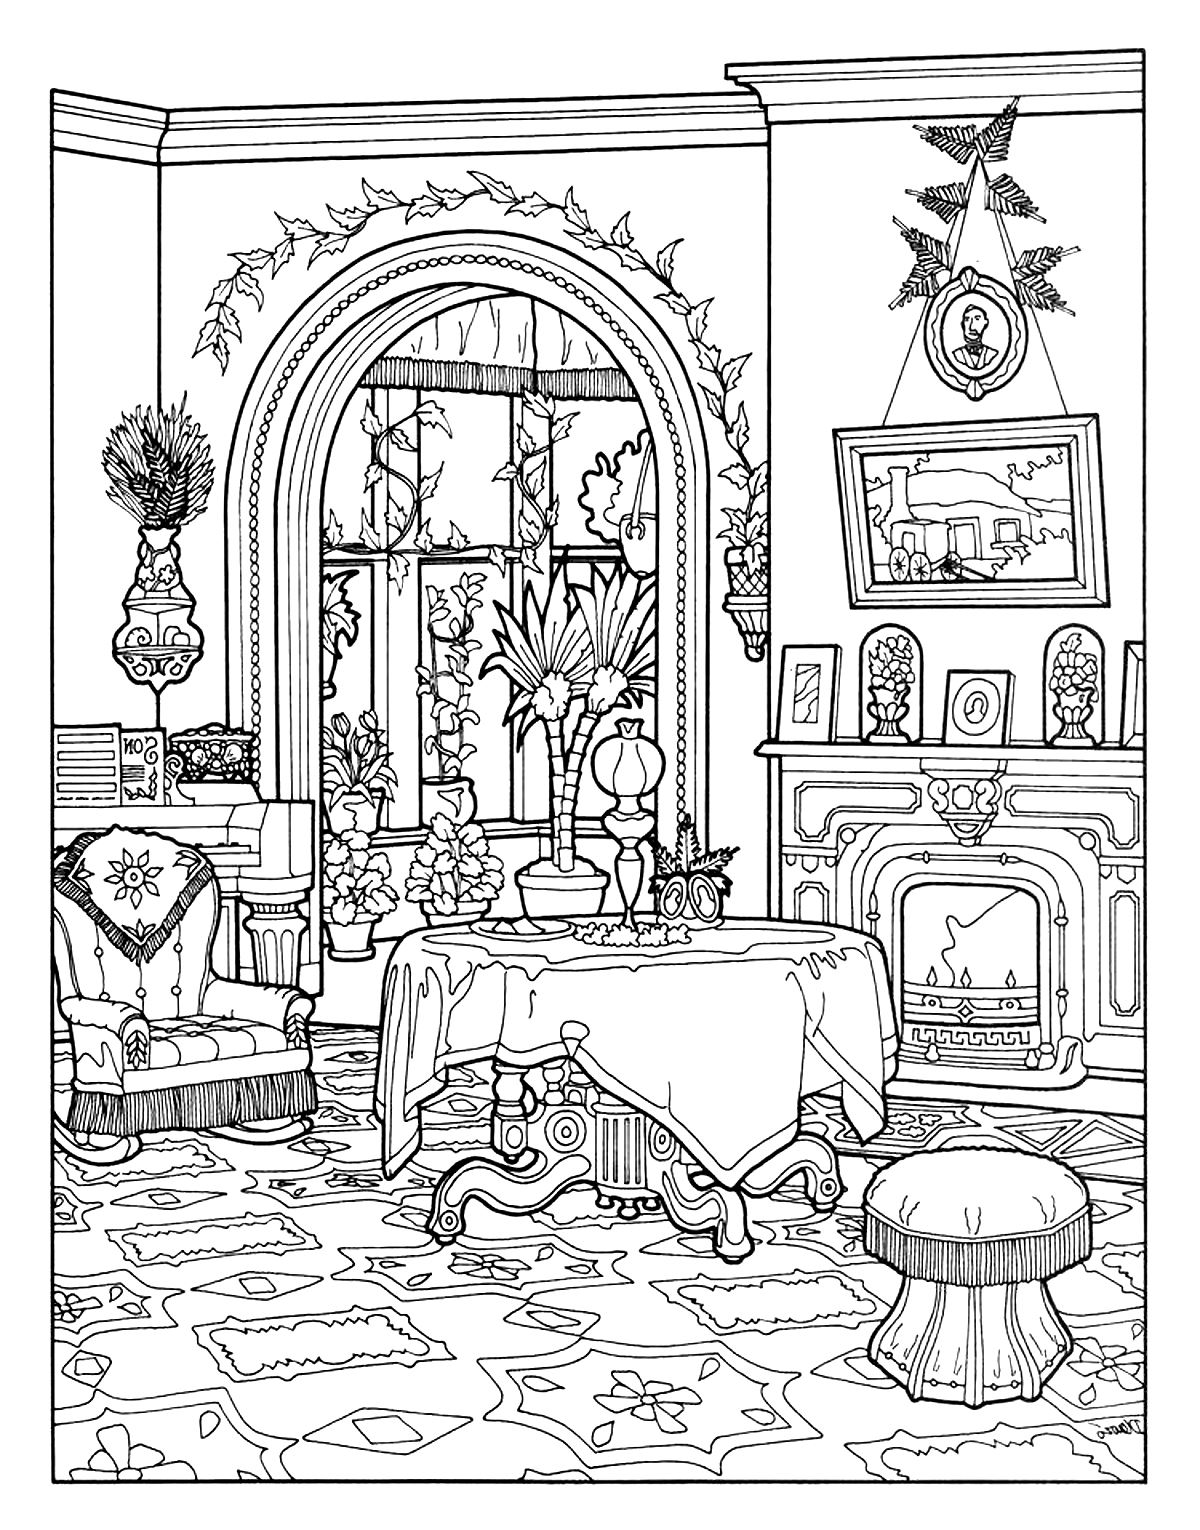 Victorian interior style - Architecture Adult Coloring Pages